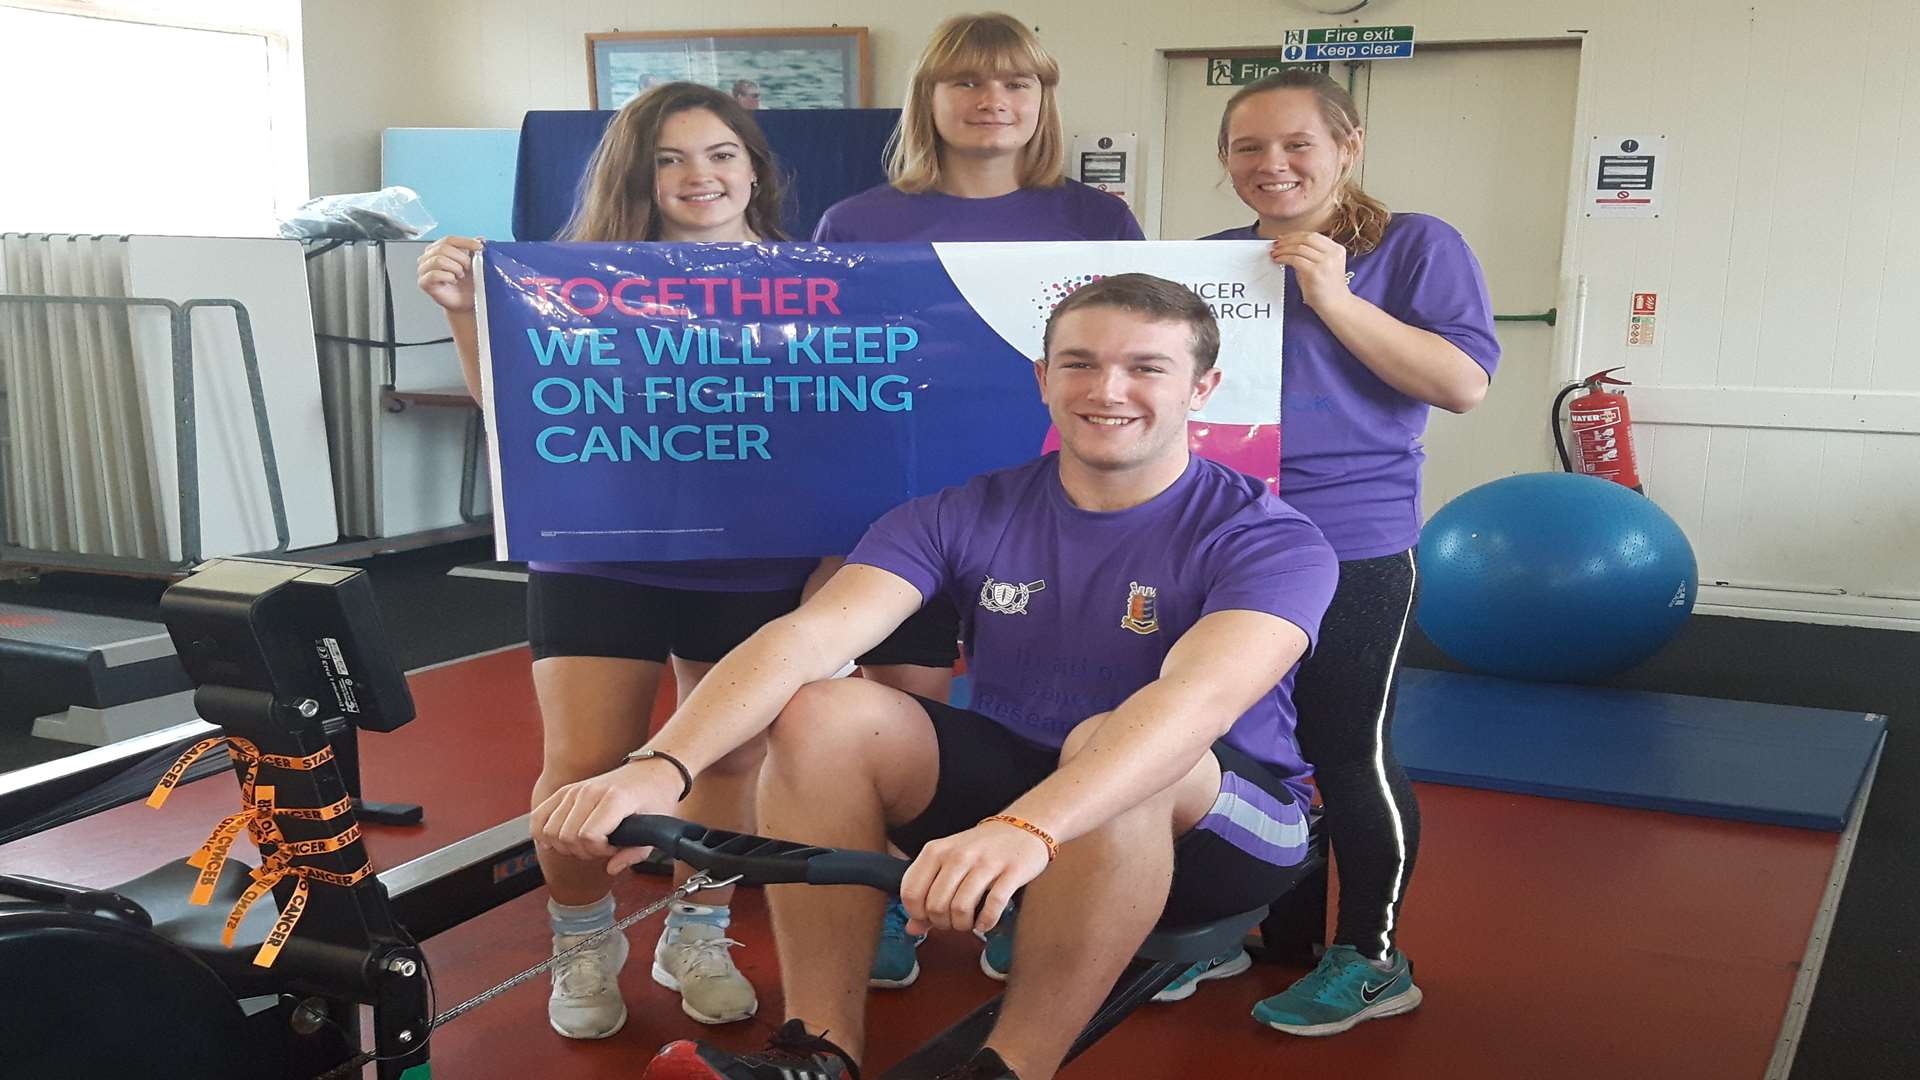 The rowers raised £1,750 for Cancer Research